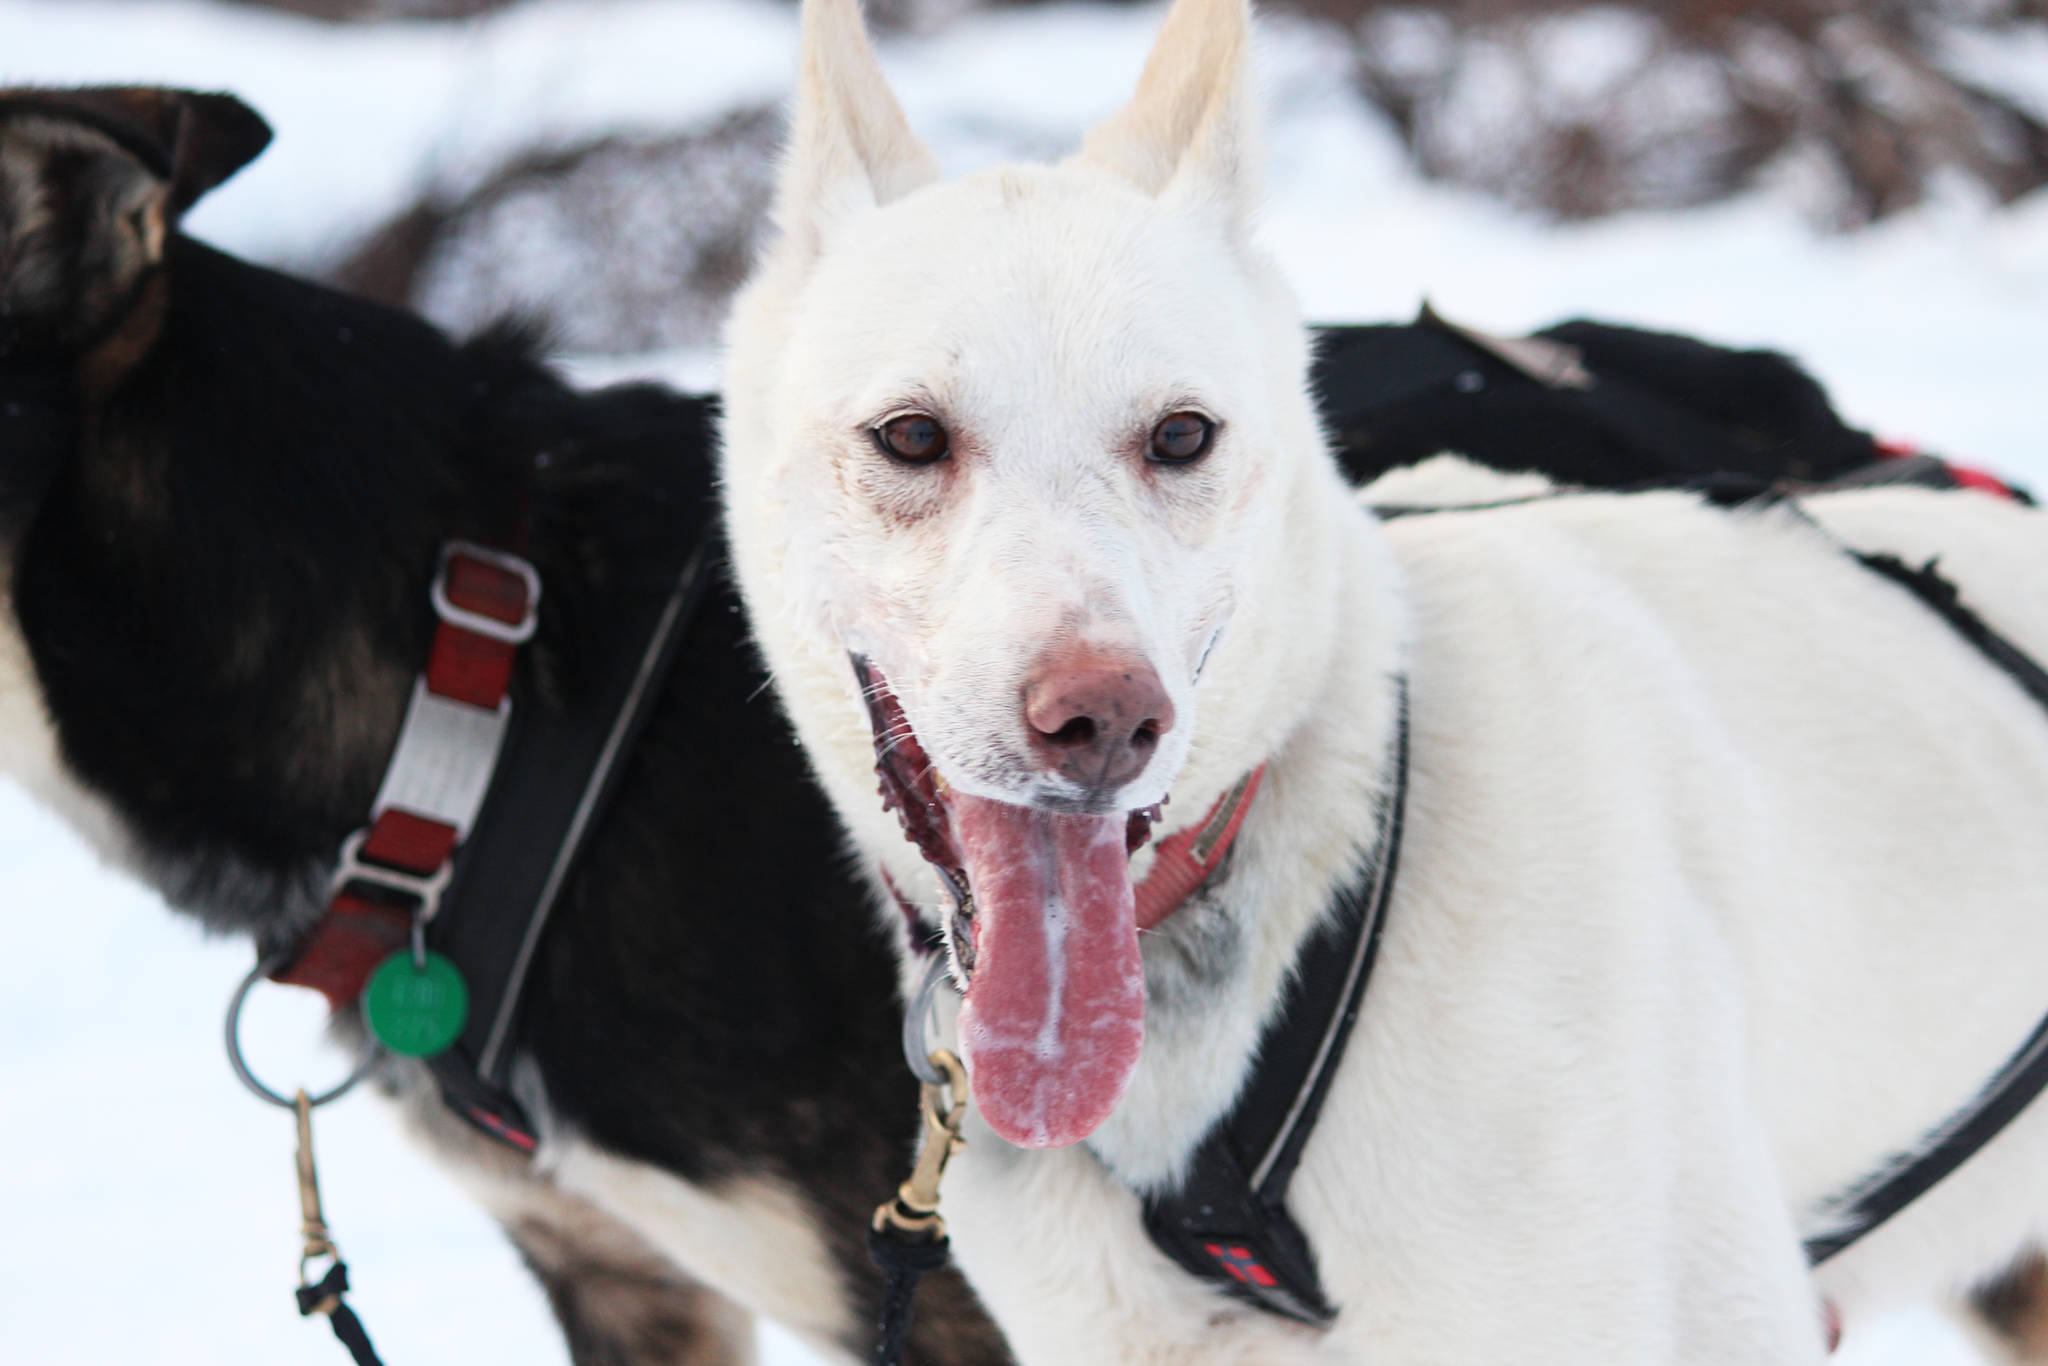 A sled dog takes a breather after arriving at McNeil Canyon Elementary School, the first checkpoint in this year’s Tustumena 200 Sled Dog Race, on Saturday, Jan. 26, 2019 near Homer, Alaska. (Photo by Megan Pacer/Homer News)